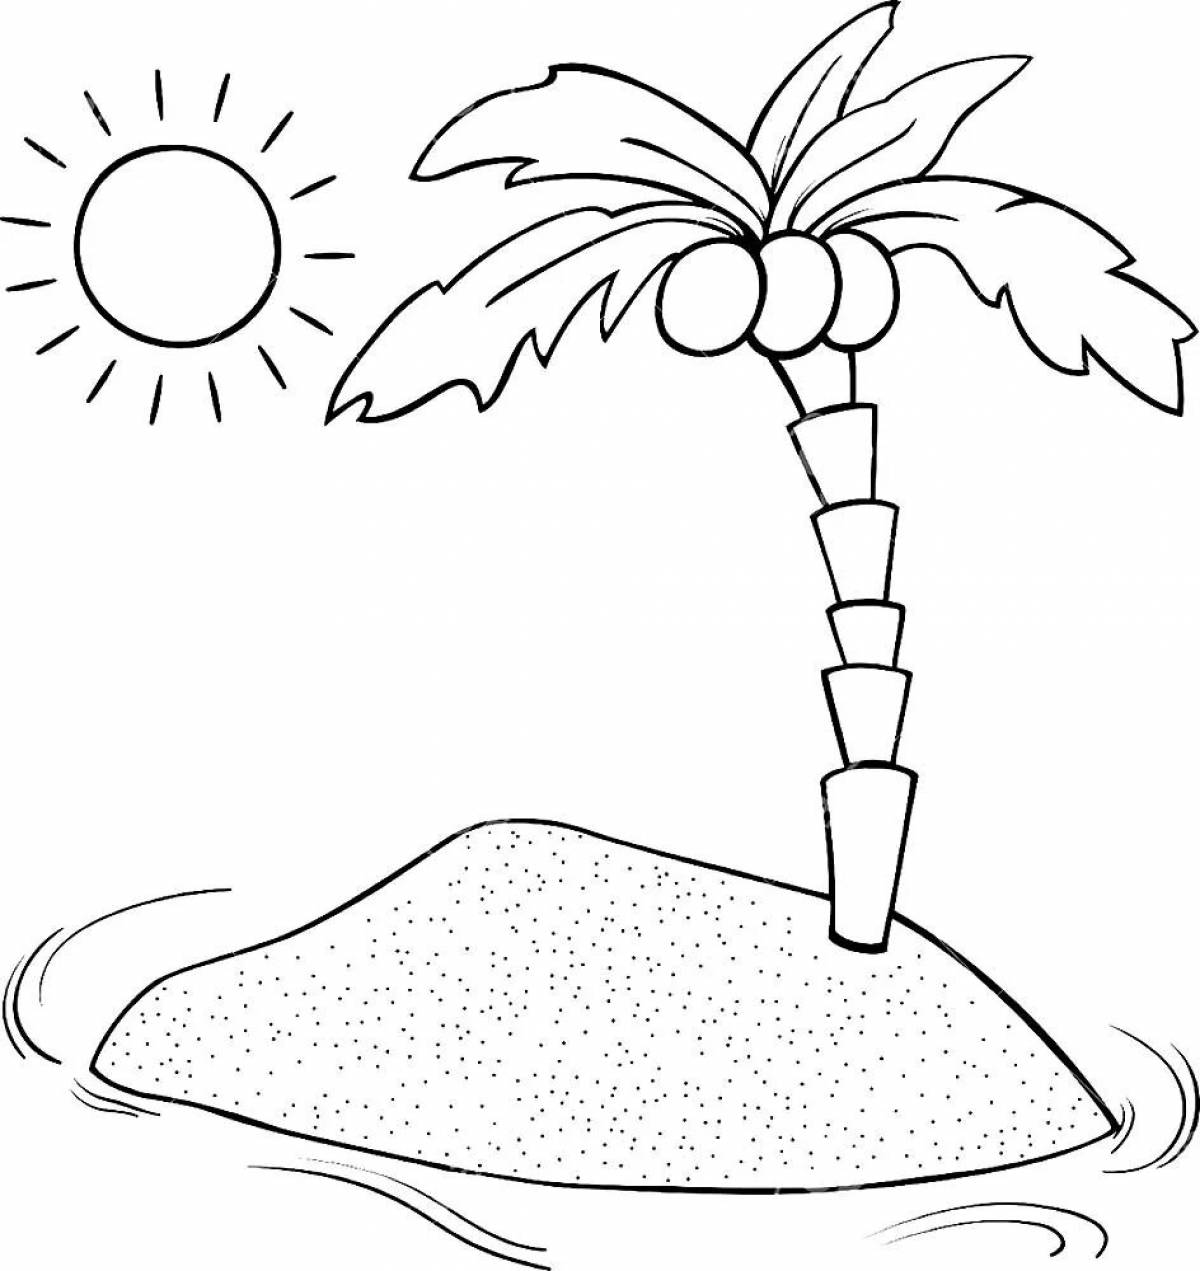 Sparkly desert island coloring page